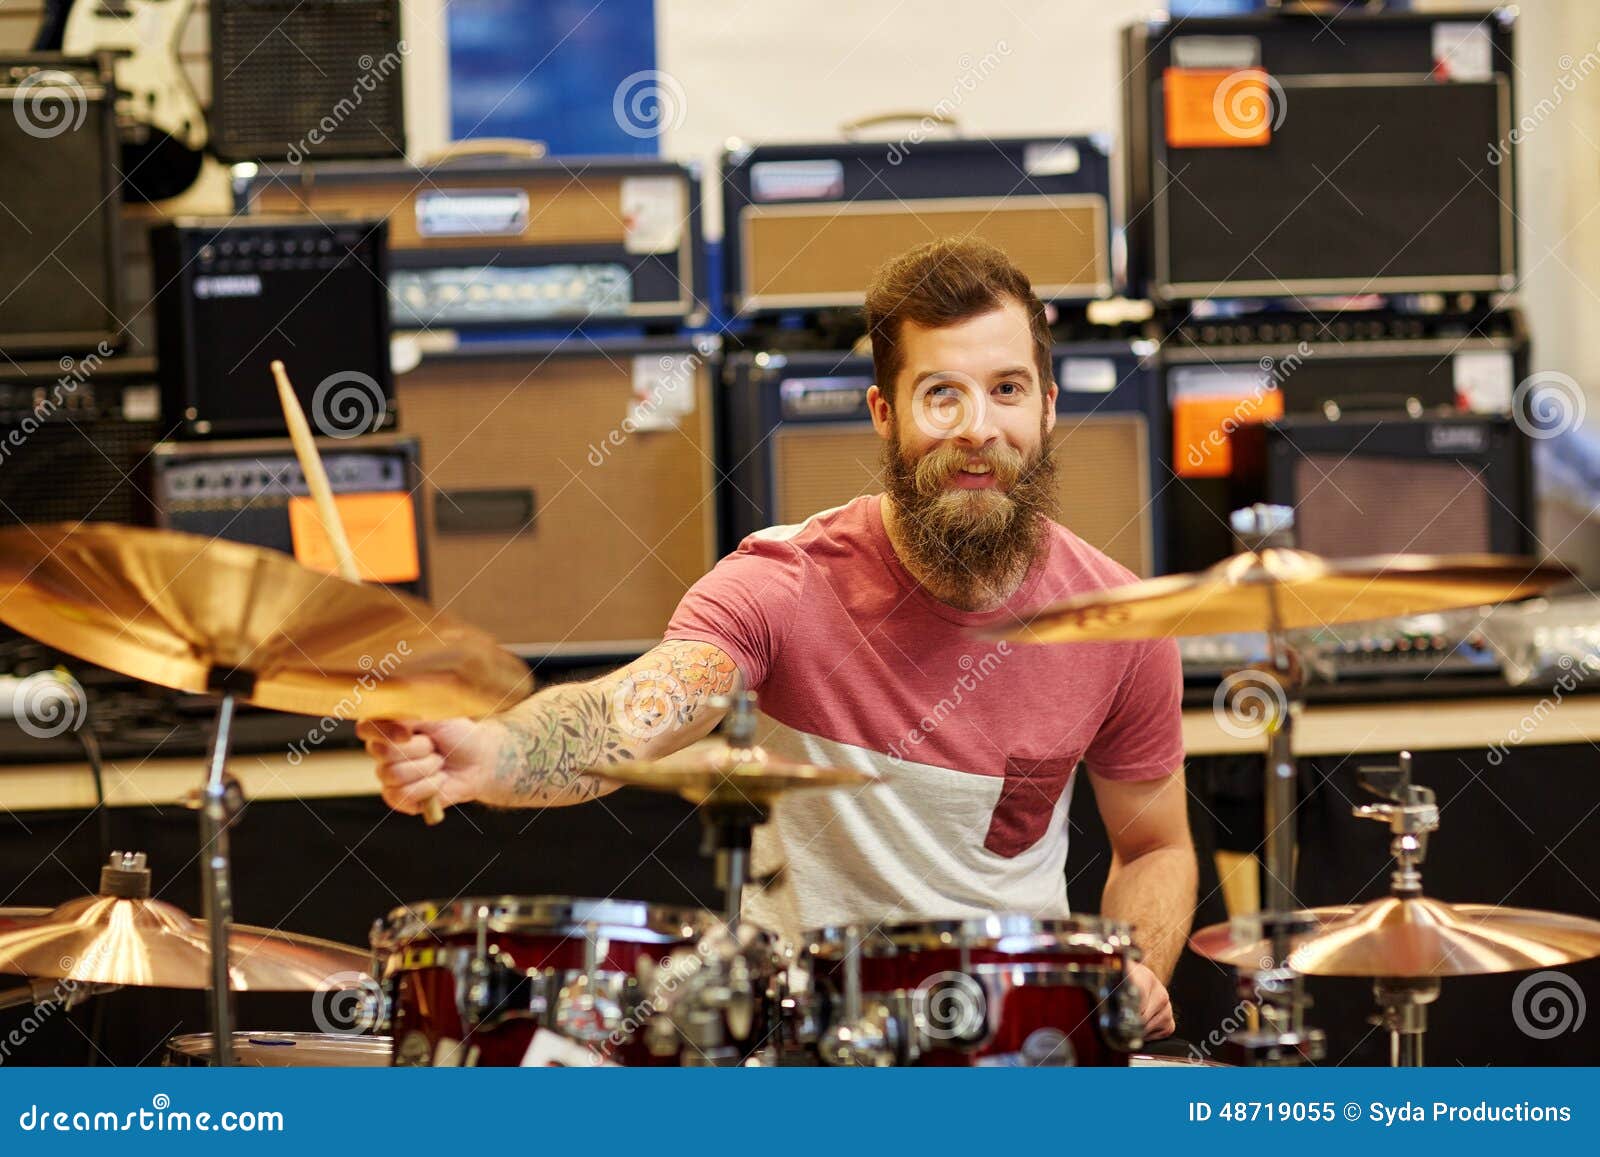 Male Musician Playing Cymbals at Music Store Stock Image - Image of ...